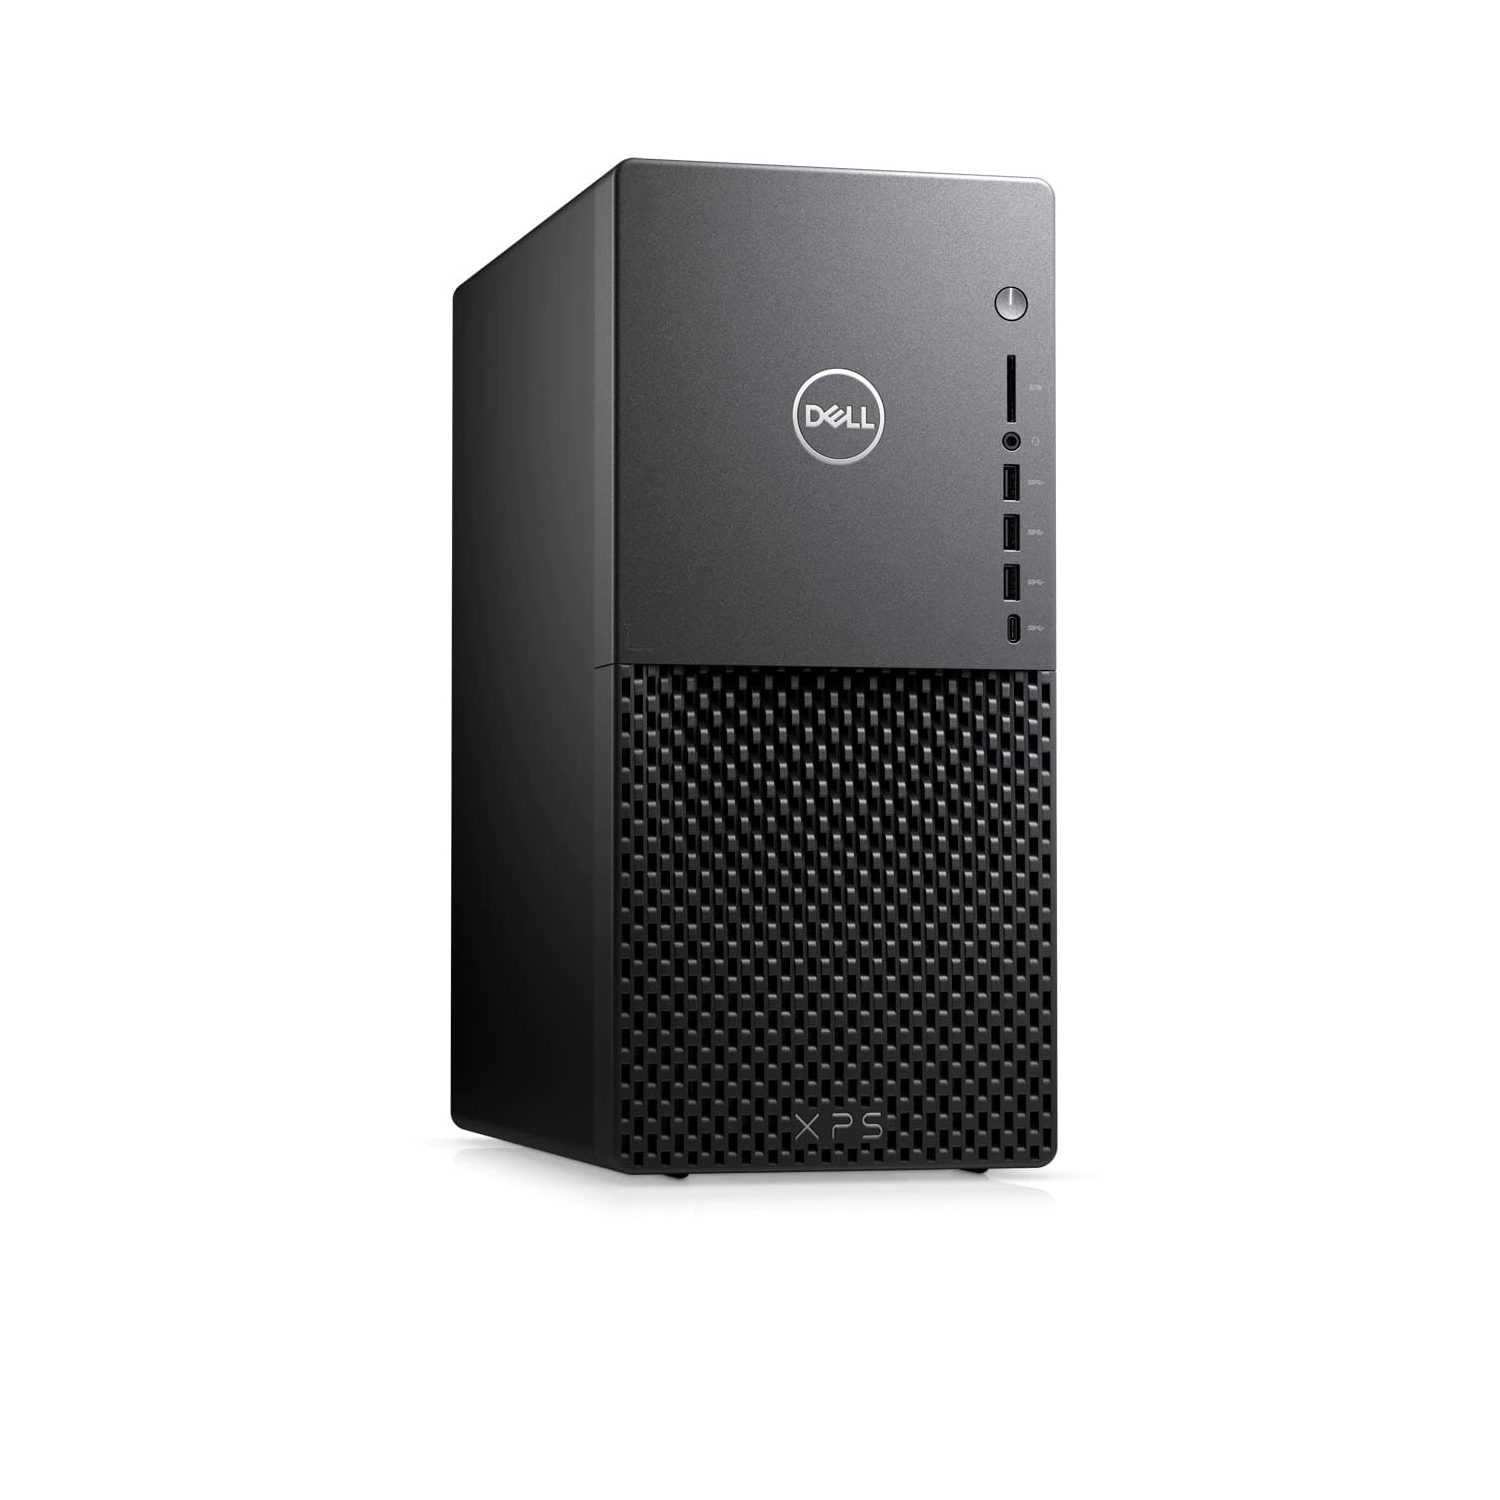 Refurbished (Excellent) - Dell XPS 8940 Desktop (2020) | Core i7 - 2TB SSD - 32GB RAM - GT 1030 | 8 Cores @ 4.9 GHz - 11th Gen CPU Certified Refurbished